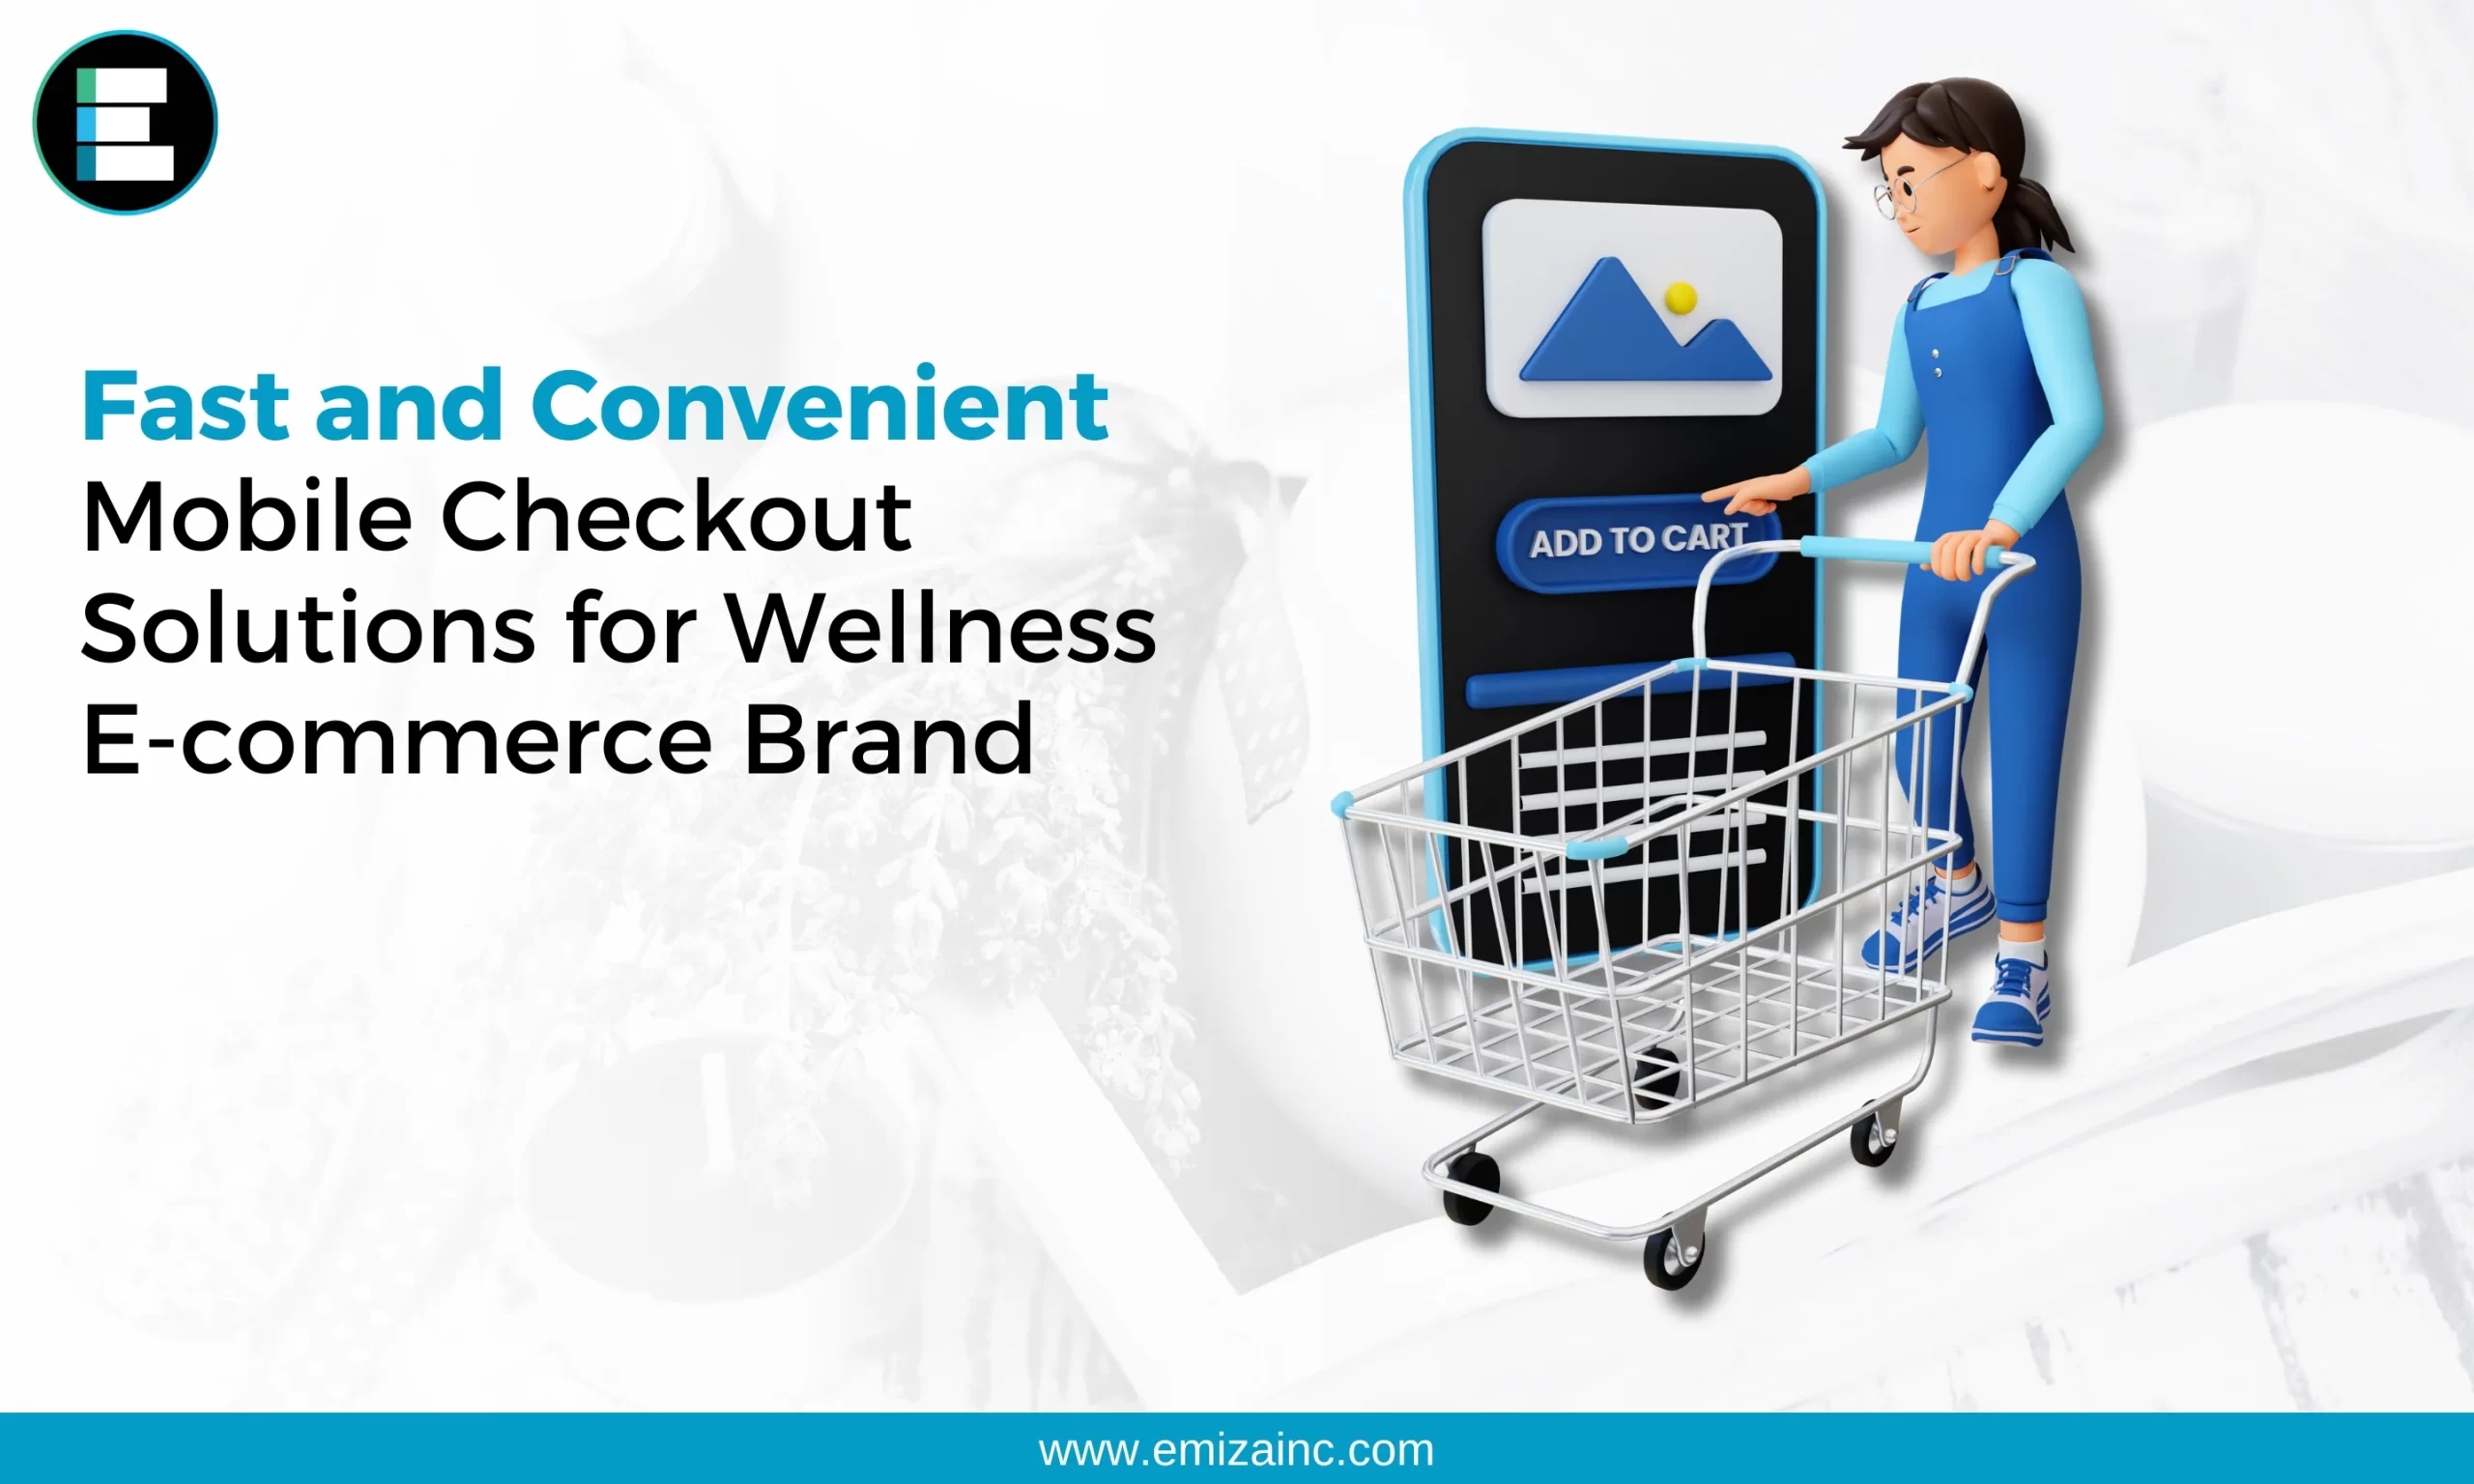 Fast and Convenient: Mobile Checkout Solution for Health and Wellness E-commerce Brand